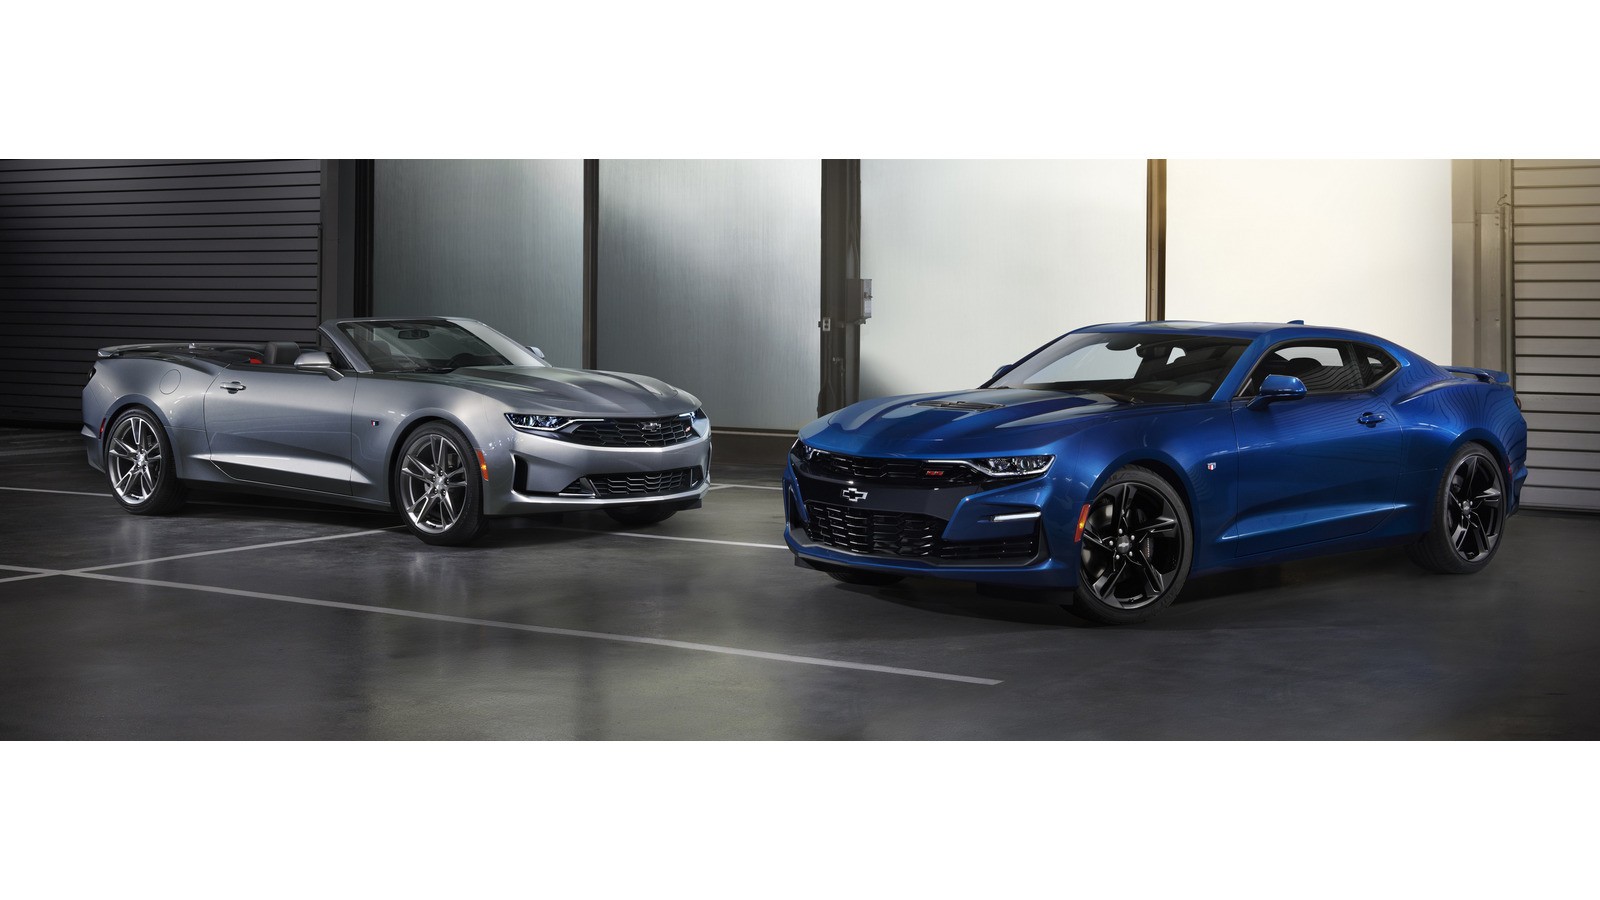 2019 Camaro line features new front-end styling with distinct di